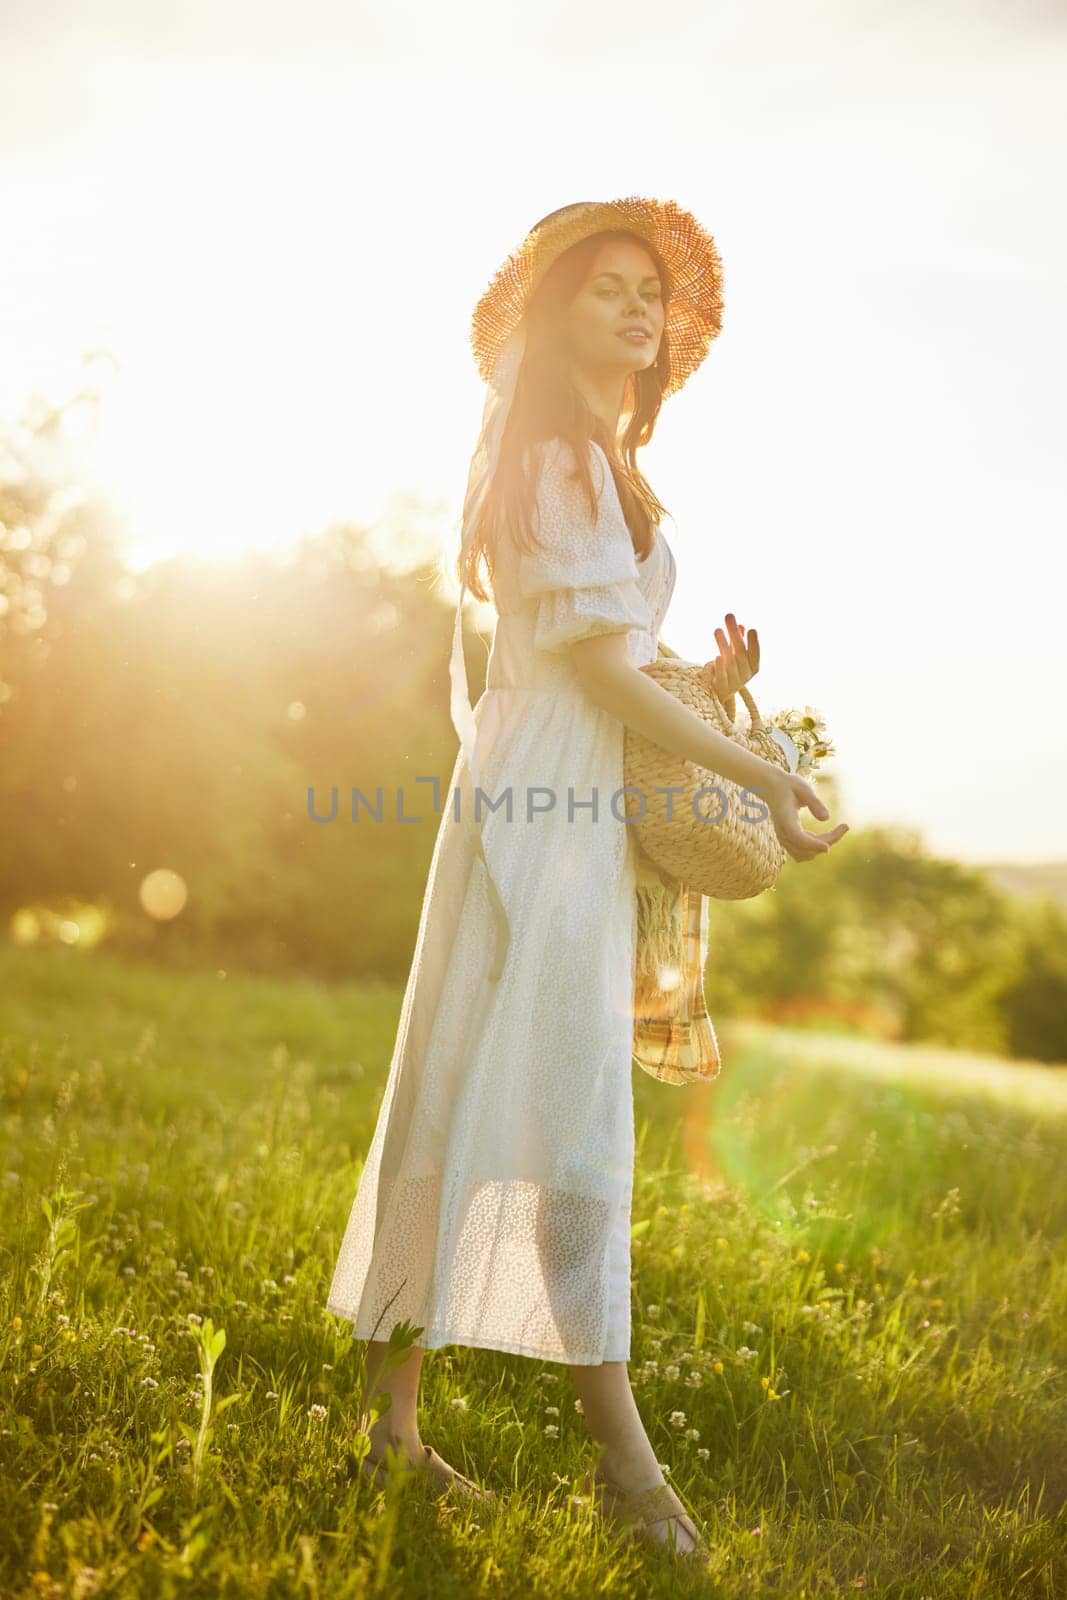 a woman in a light dress walks in the countryside in the rays of the setting sun. High quality photo